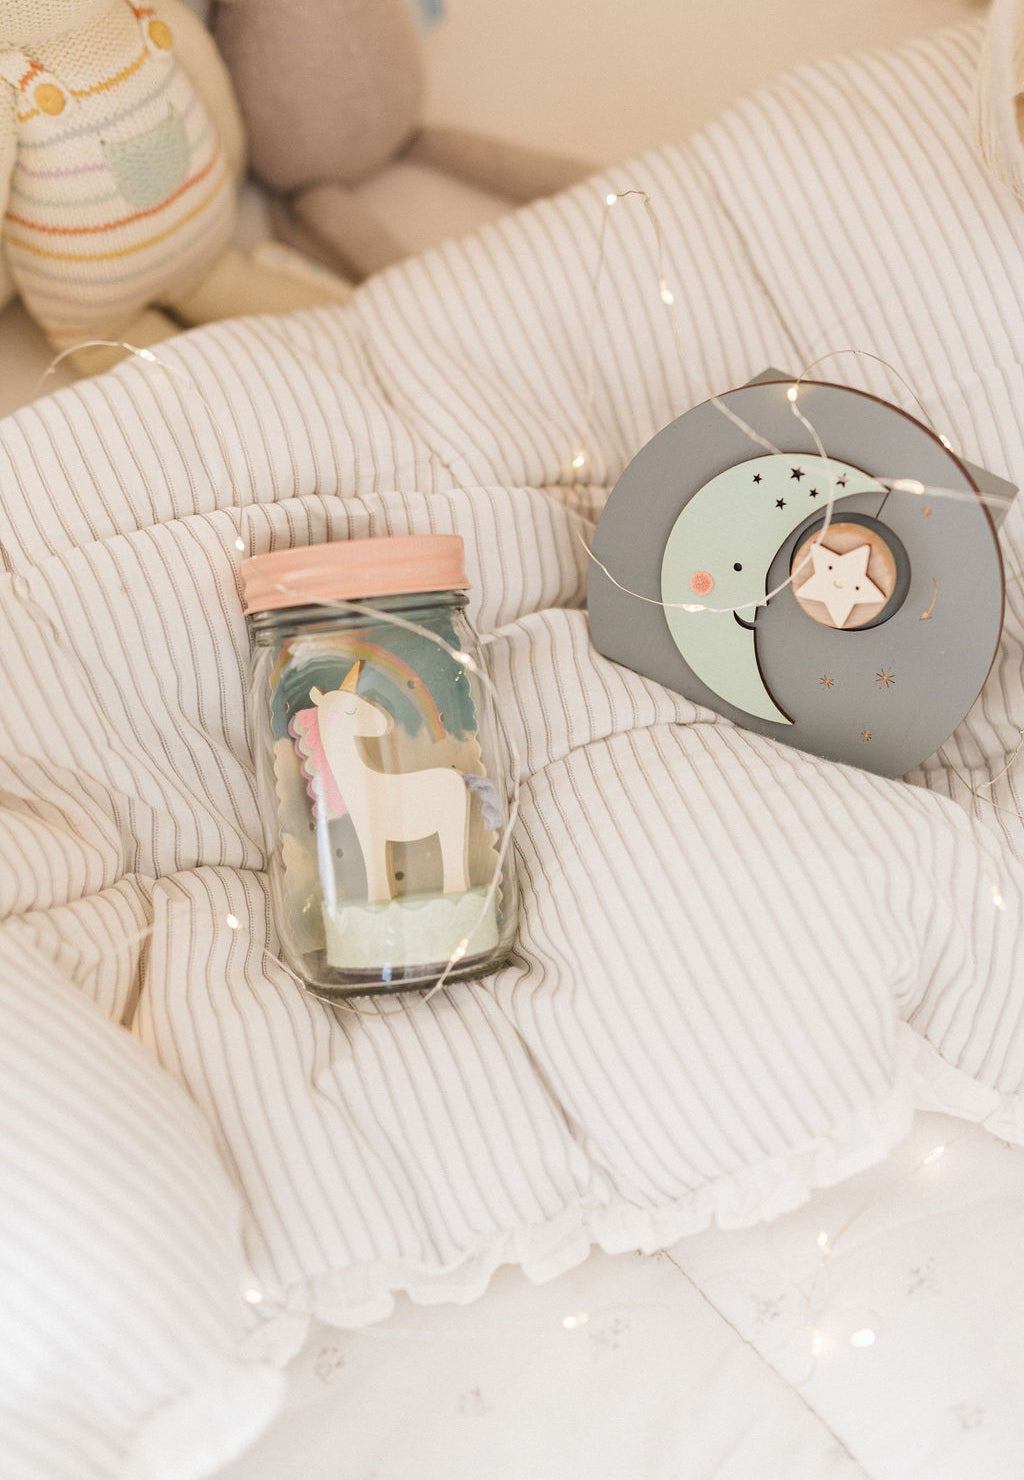 Our unicorn mason jar solar light is a magical nightlight and our over the moon music box plays twinkle, twinkle little star - both sweet decor for a nursery or child's room